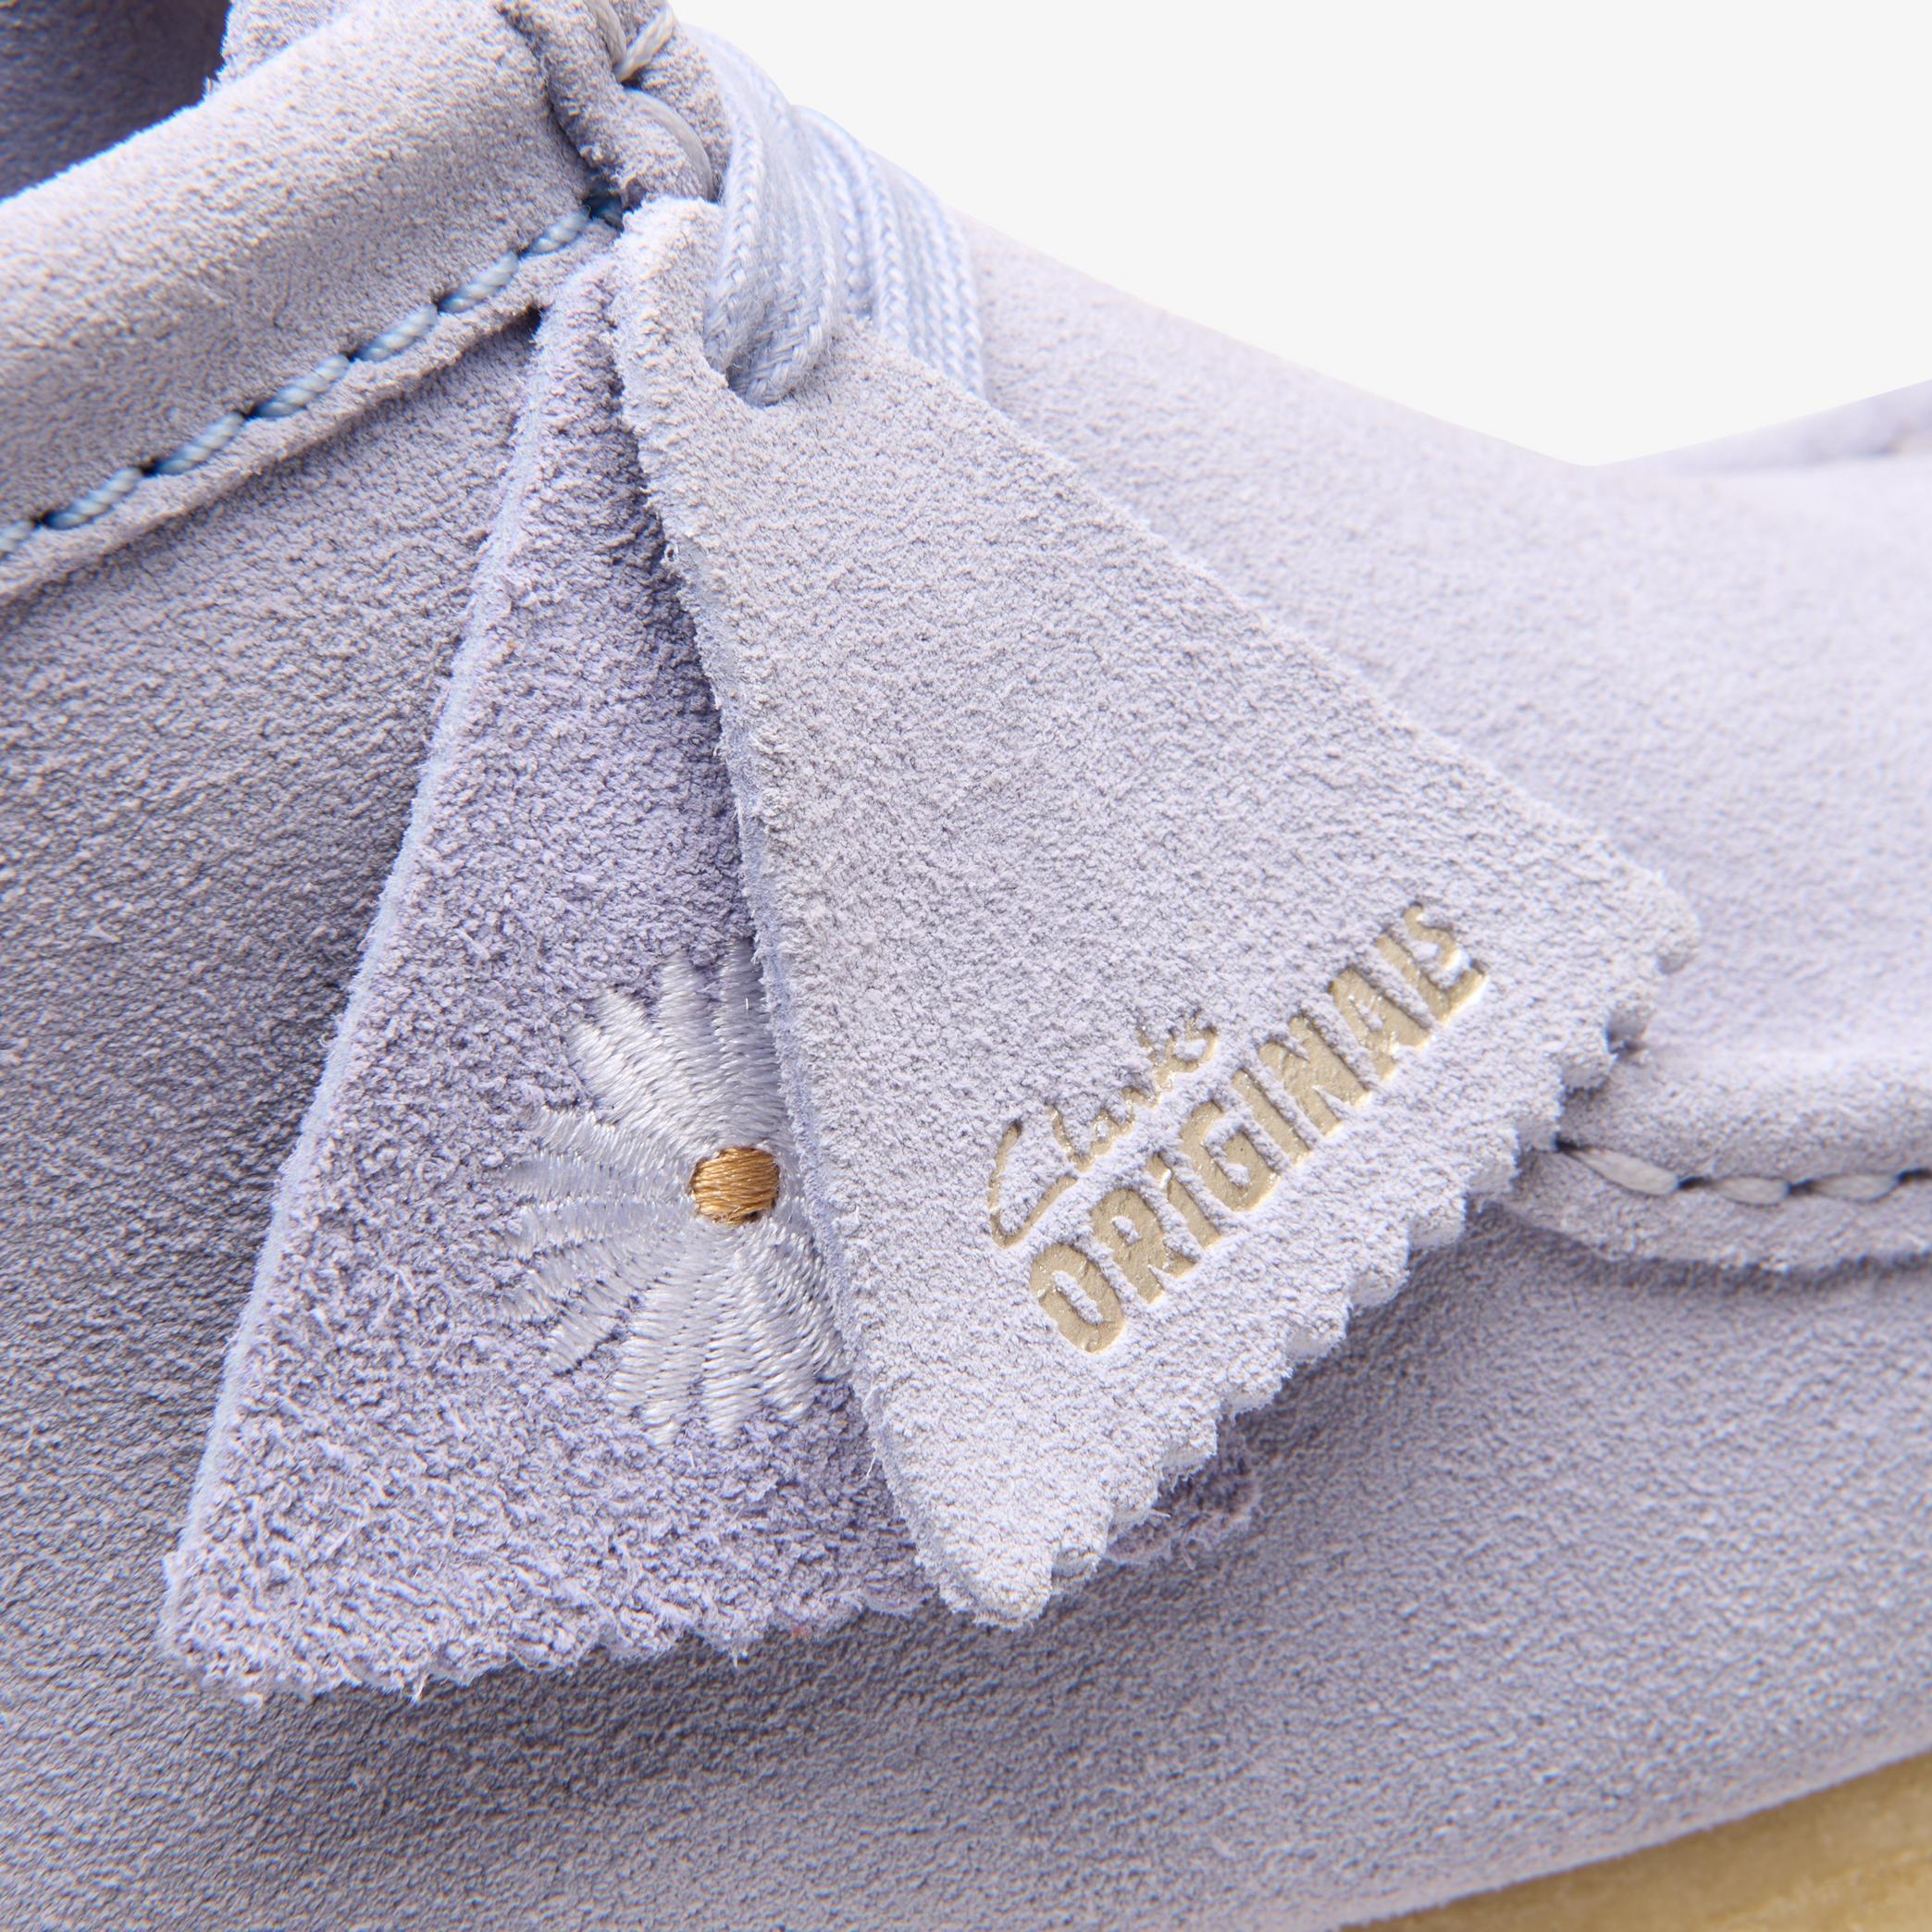 Wallabee Boot Cloud Grey Suede Wallabee, view 7 of 7